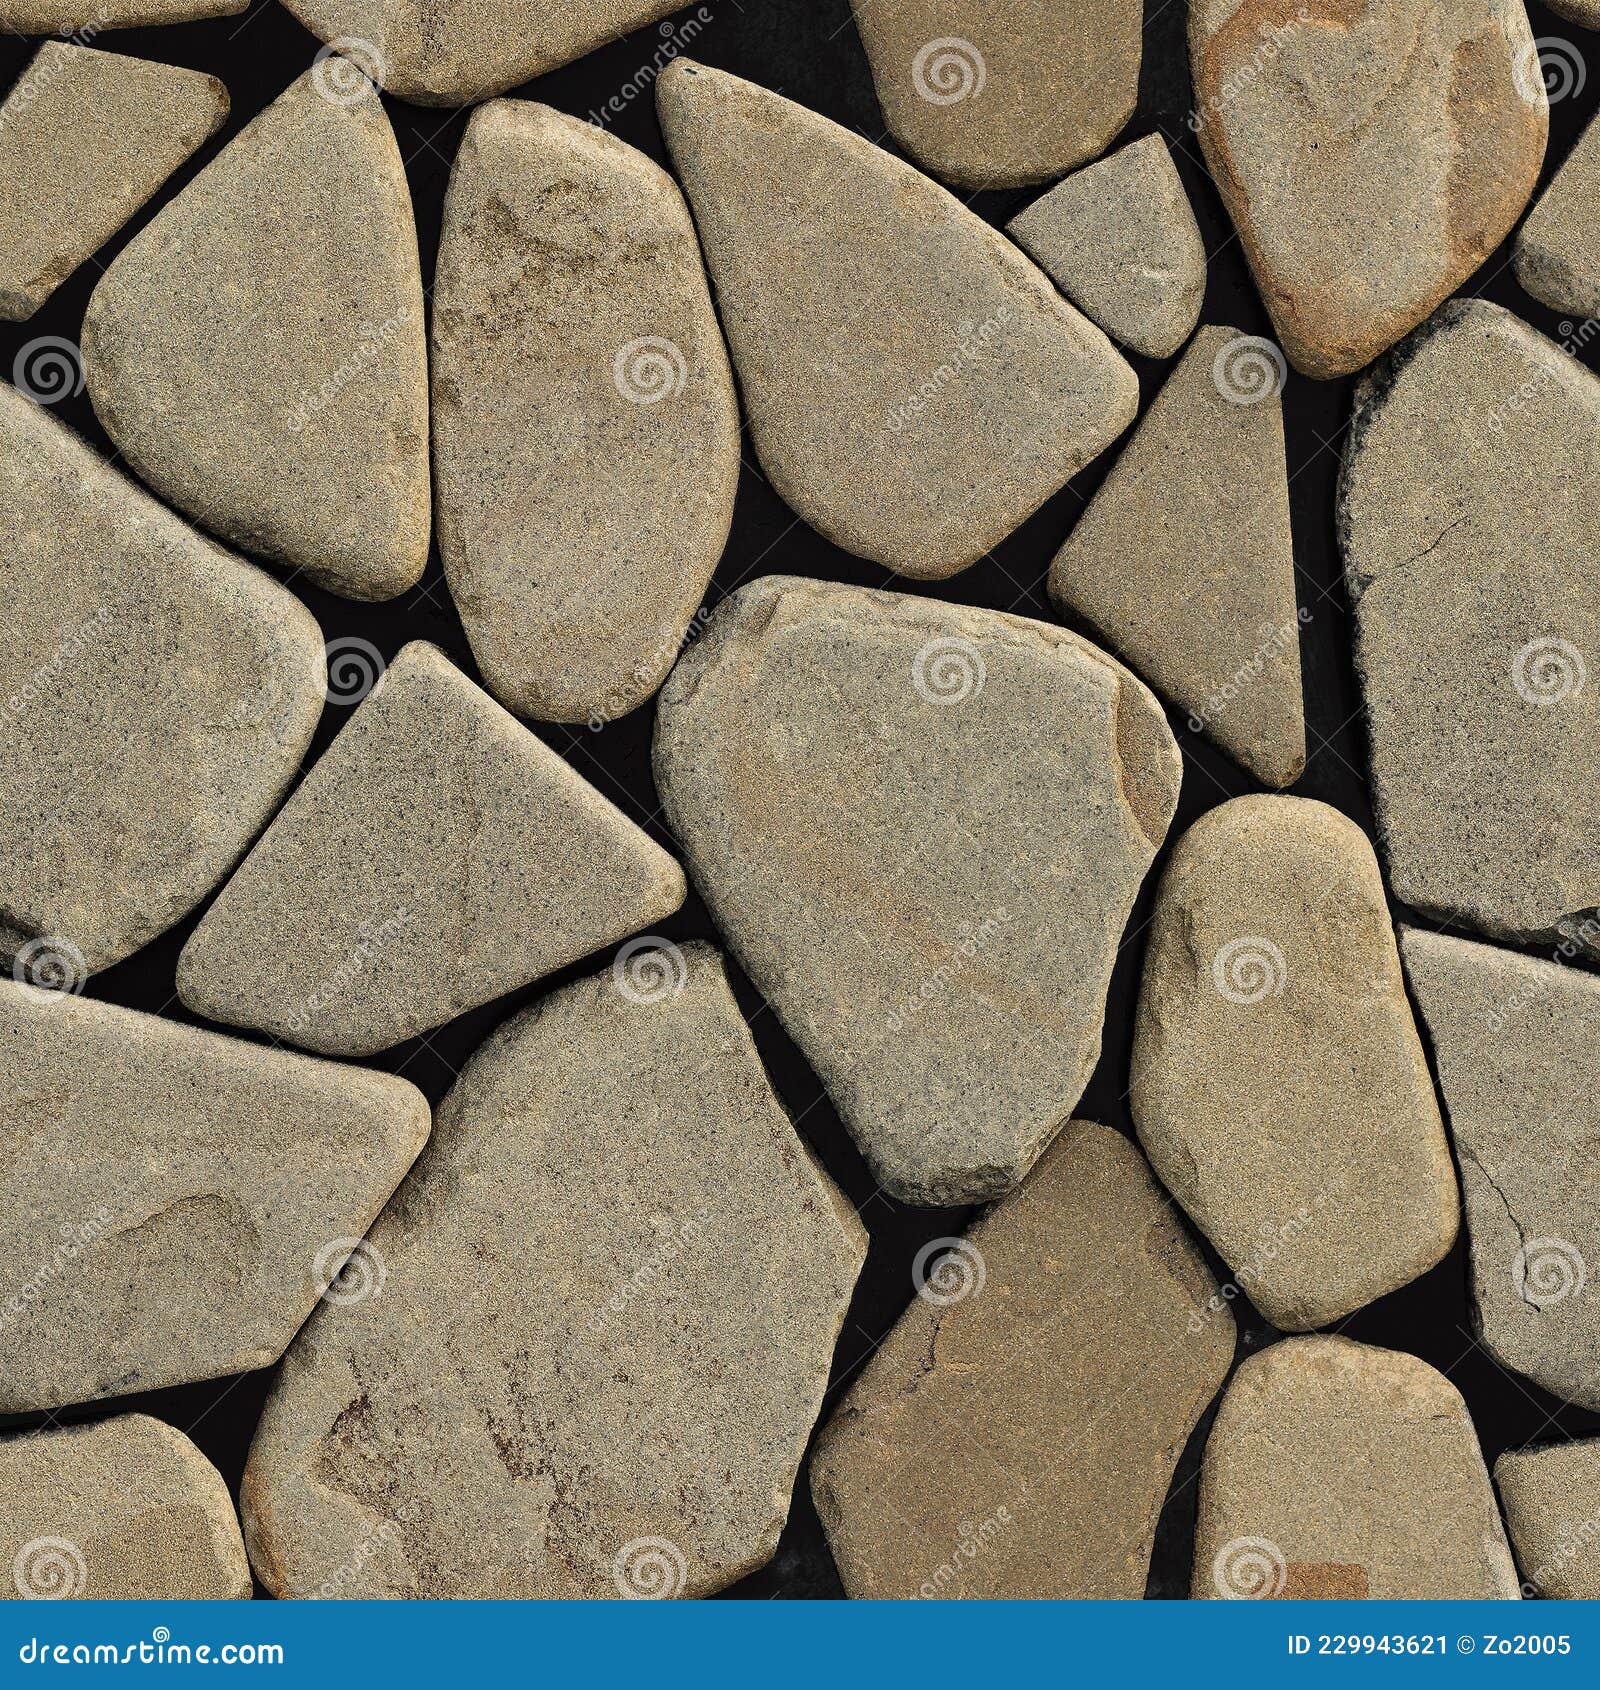 Seamless Texture of Smooth Stone. Sandstone Background with